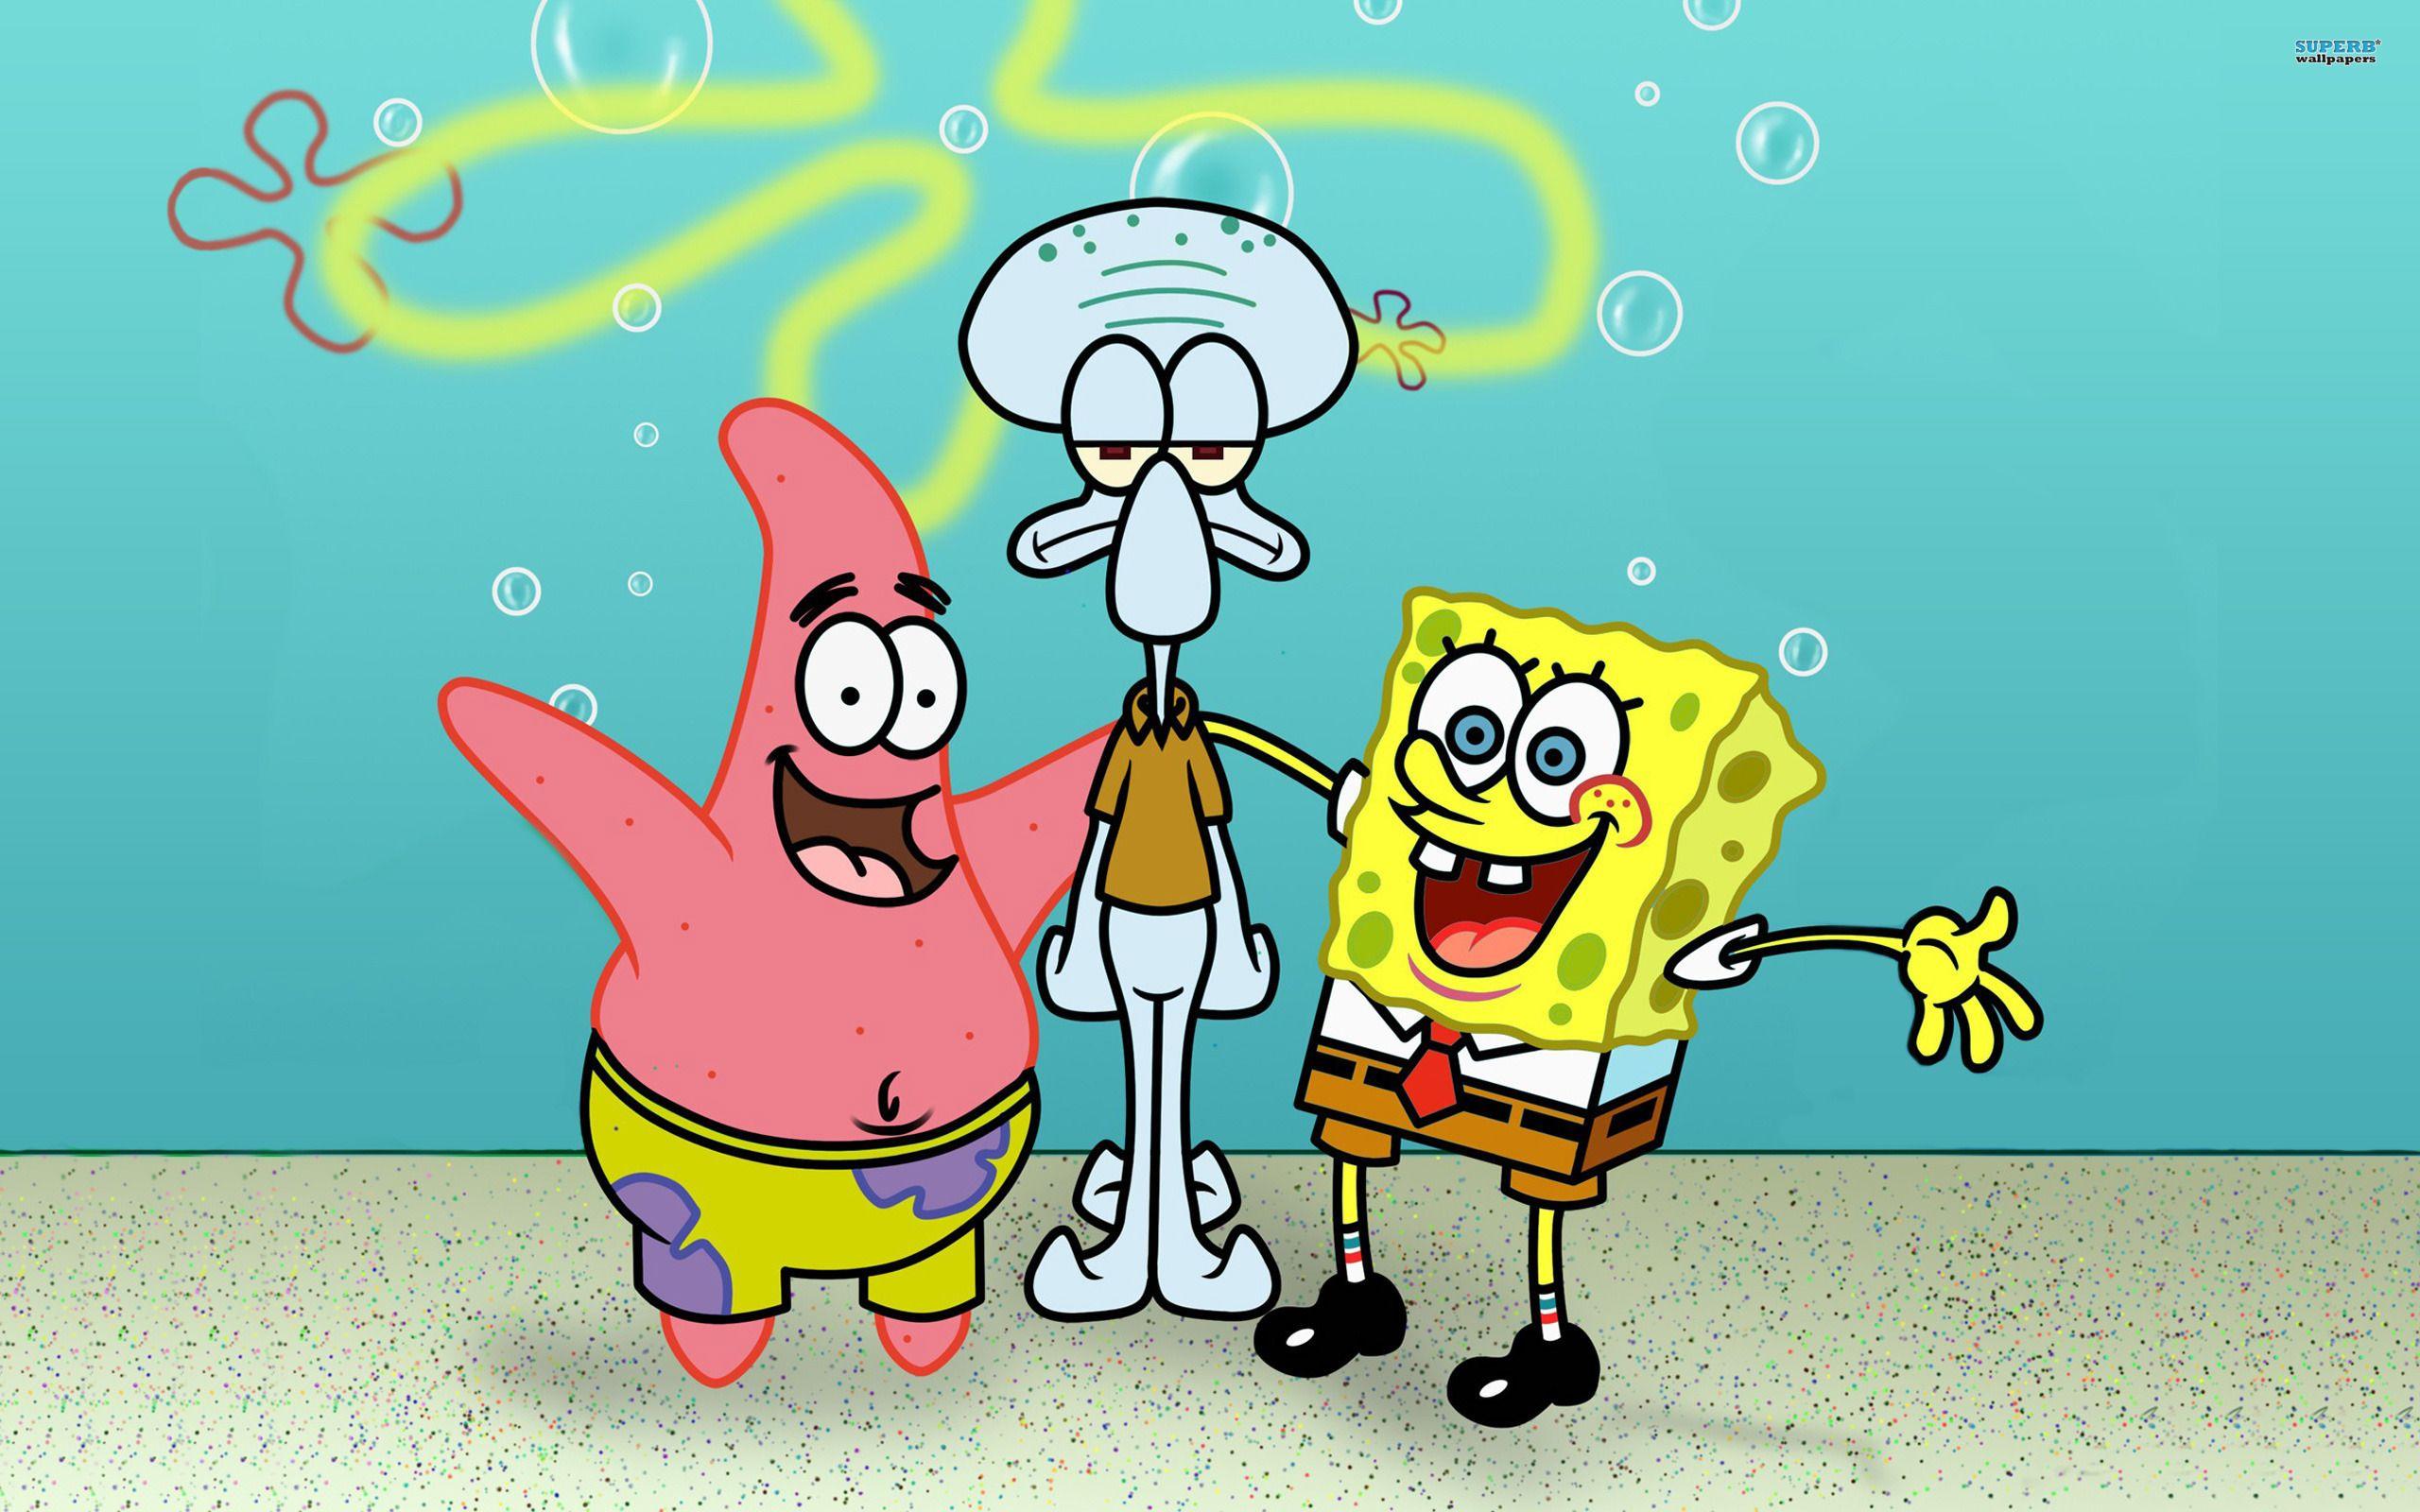 Value Picture Of Patrick And Spongebob Squidward HD Wallpaper